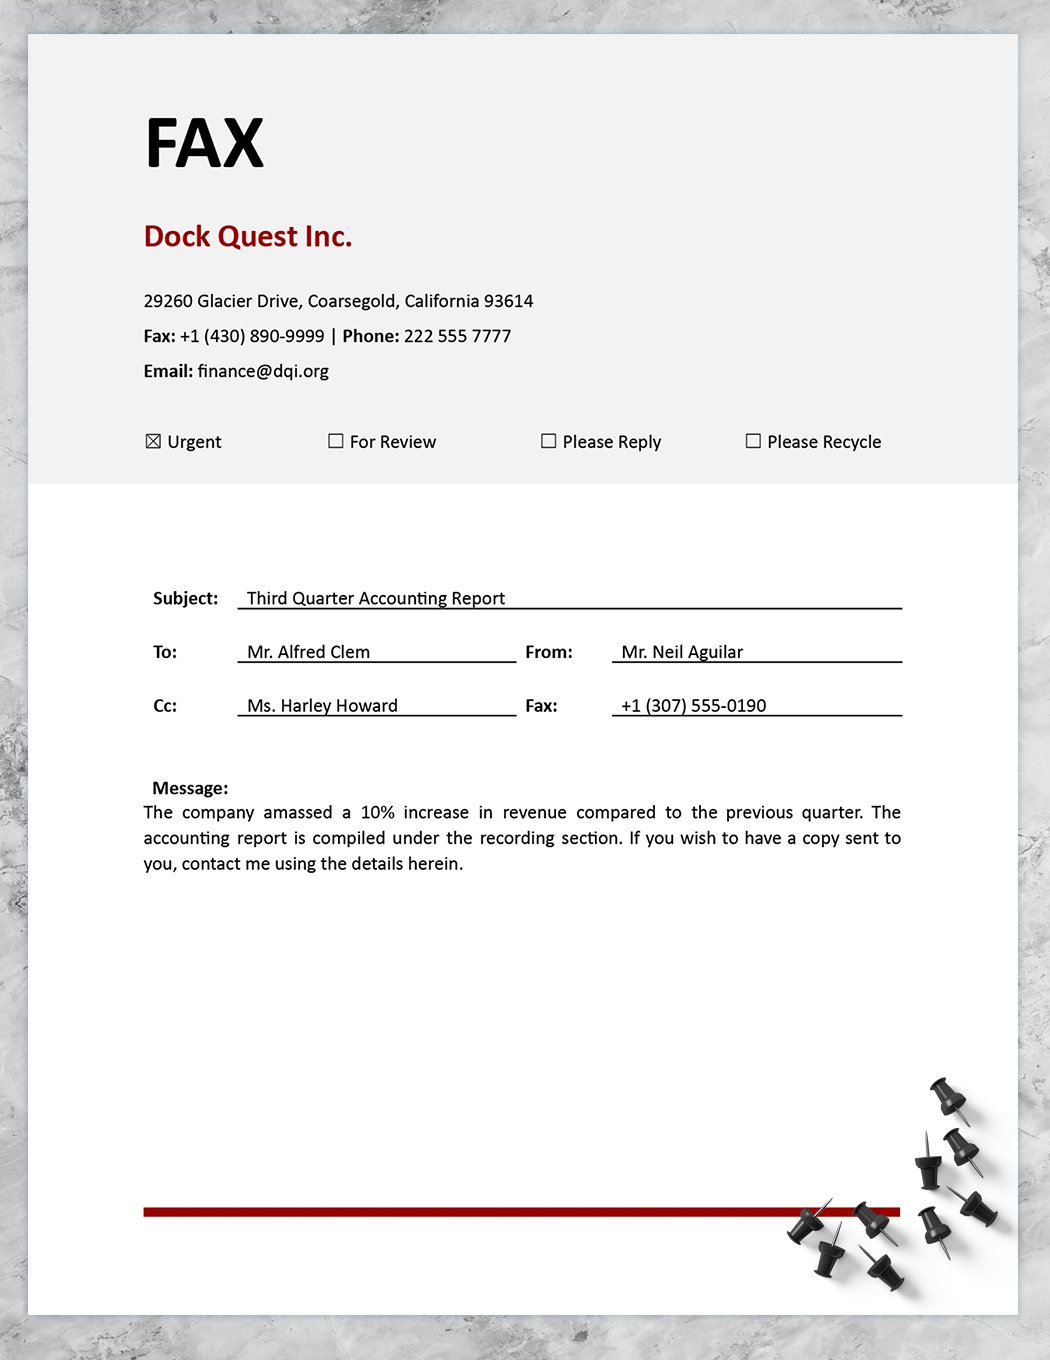 Accounting Fax Cover Sheet Template